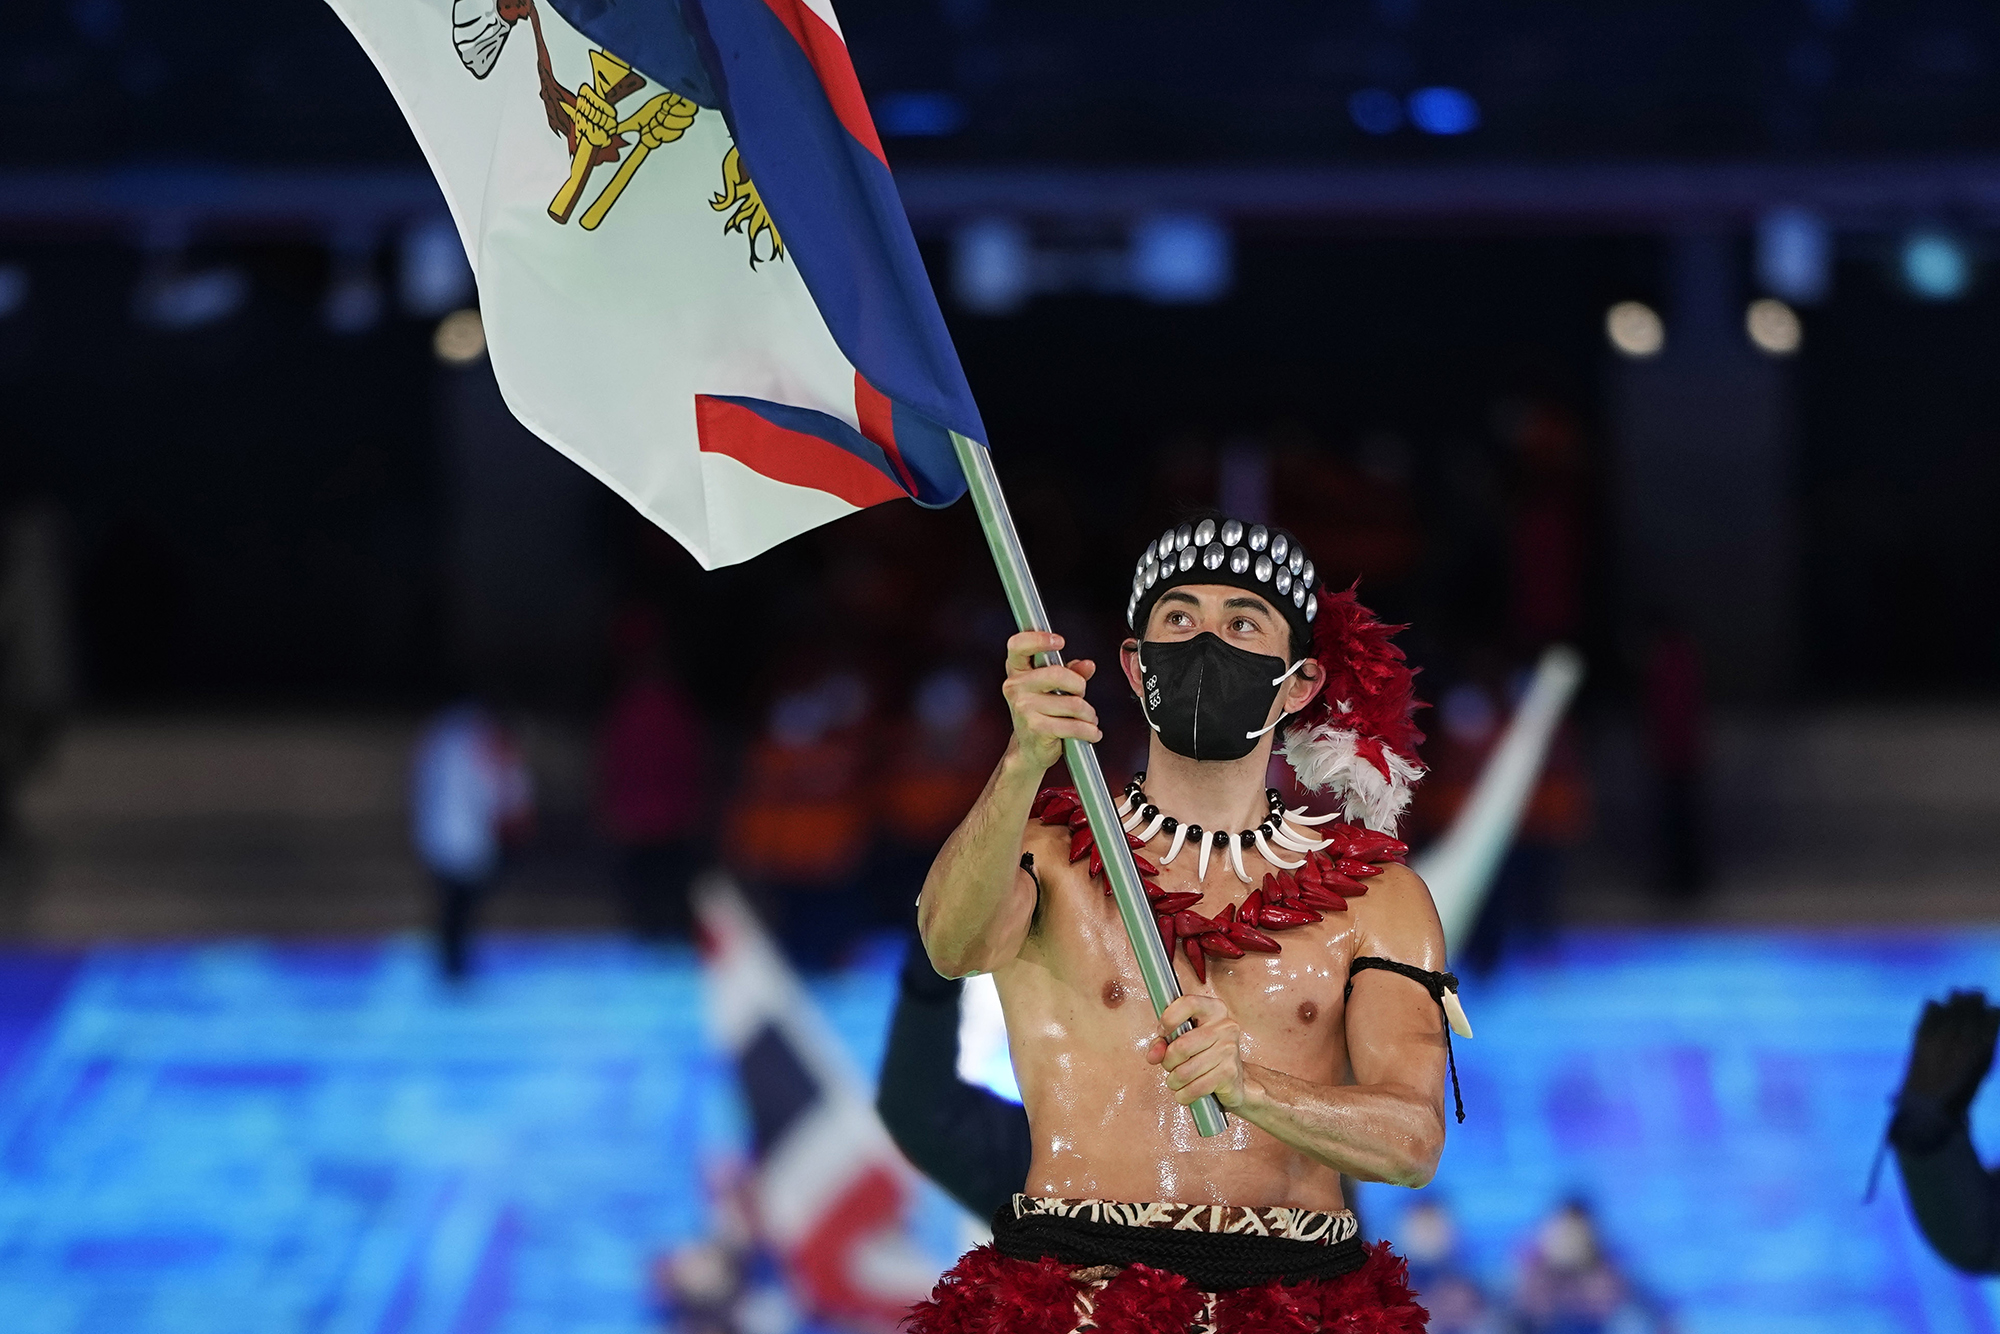 Nathan Crumpton, of American Samoa, carries his national flag into the stadium during the opening ceremony of the 2022 Winter Olympics, February 4 in Beijing. 